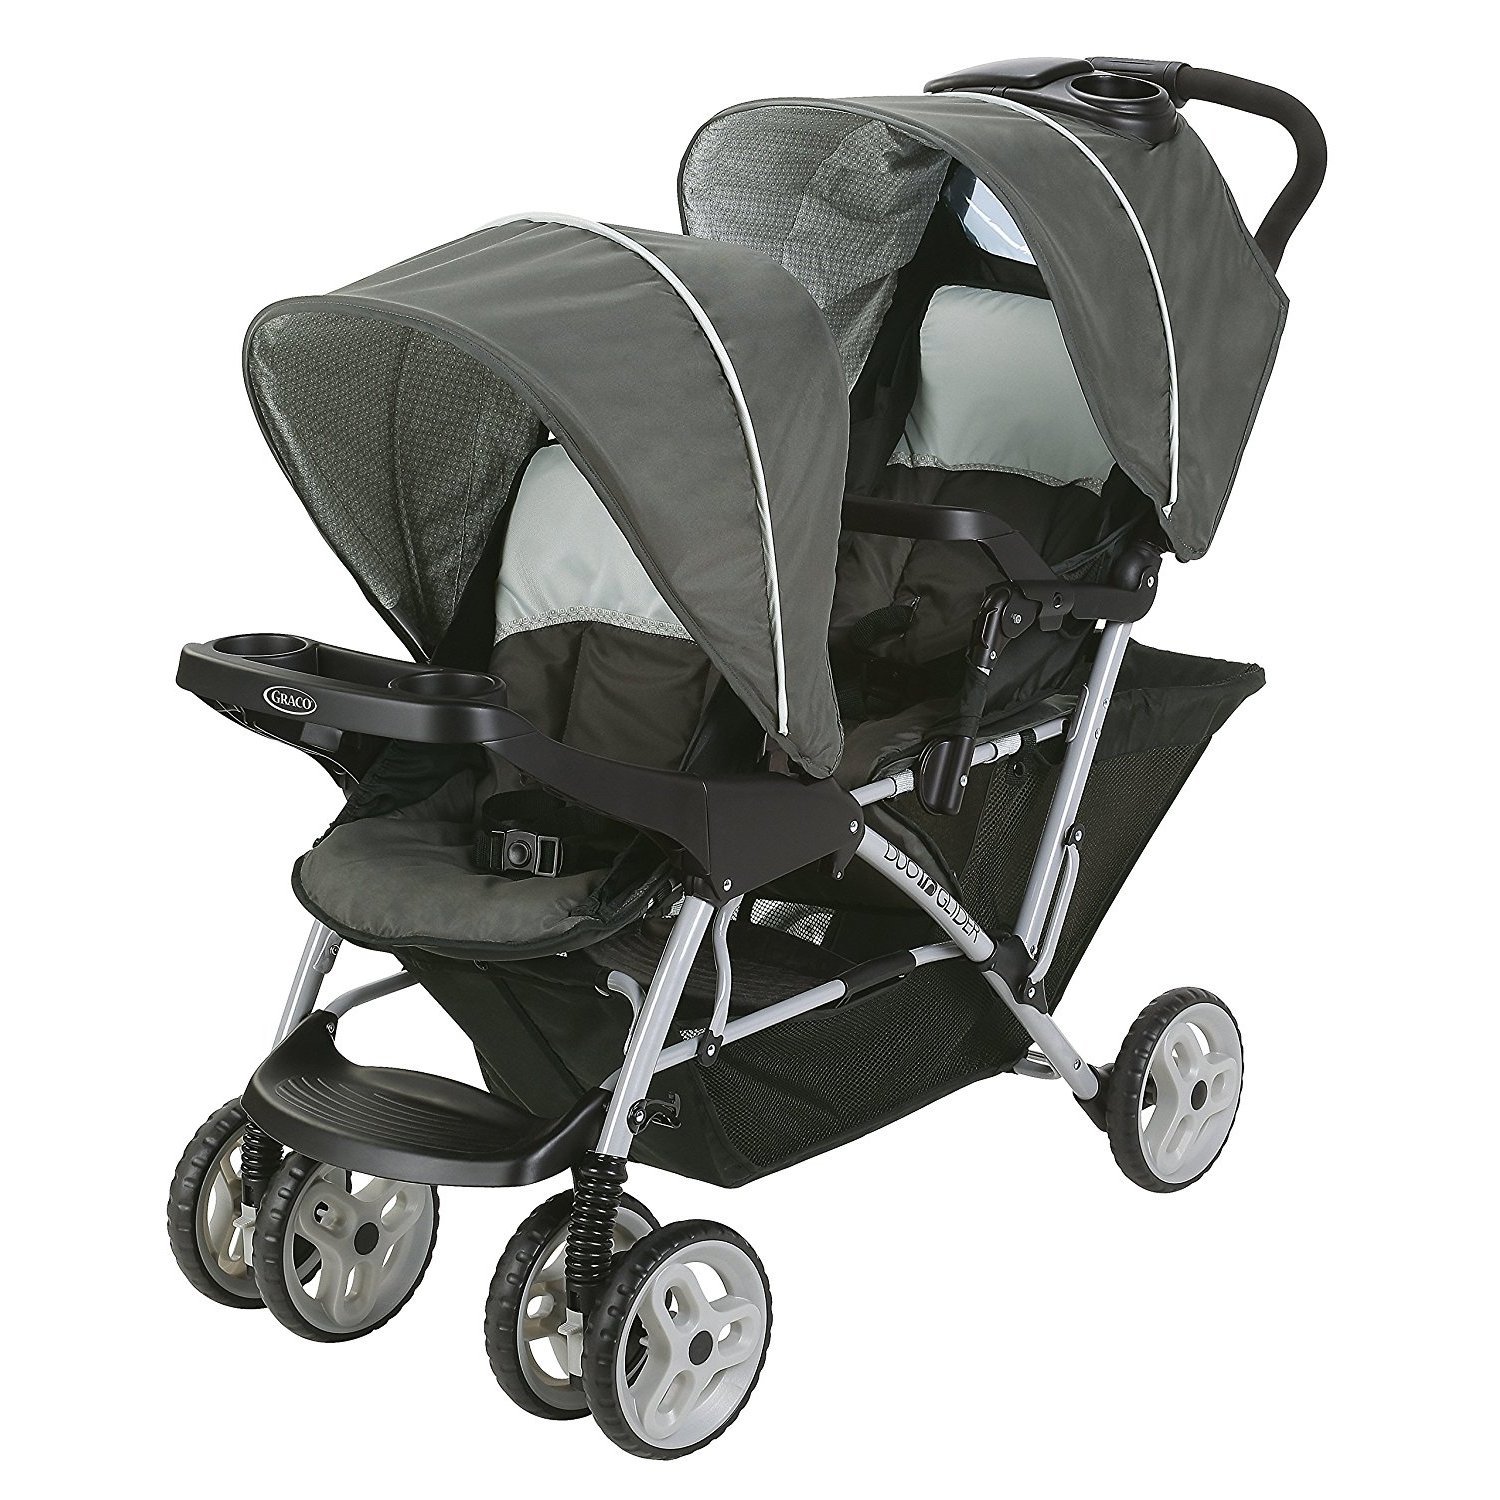 Graco DuoGlider Click Connect Double Stroller, Glacier, 27.37 lbs - image 1 of 8